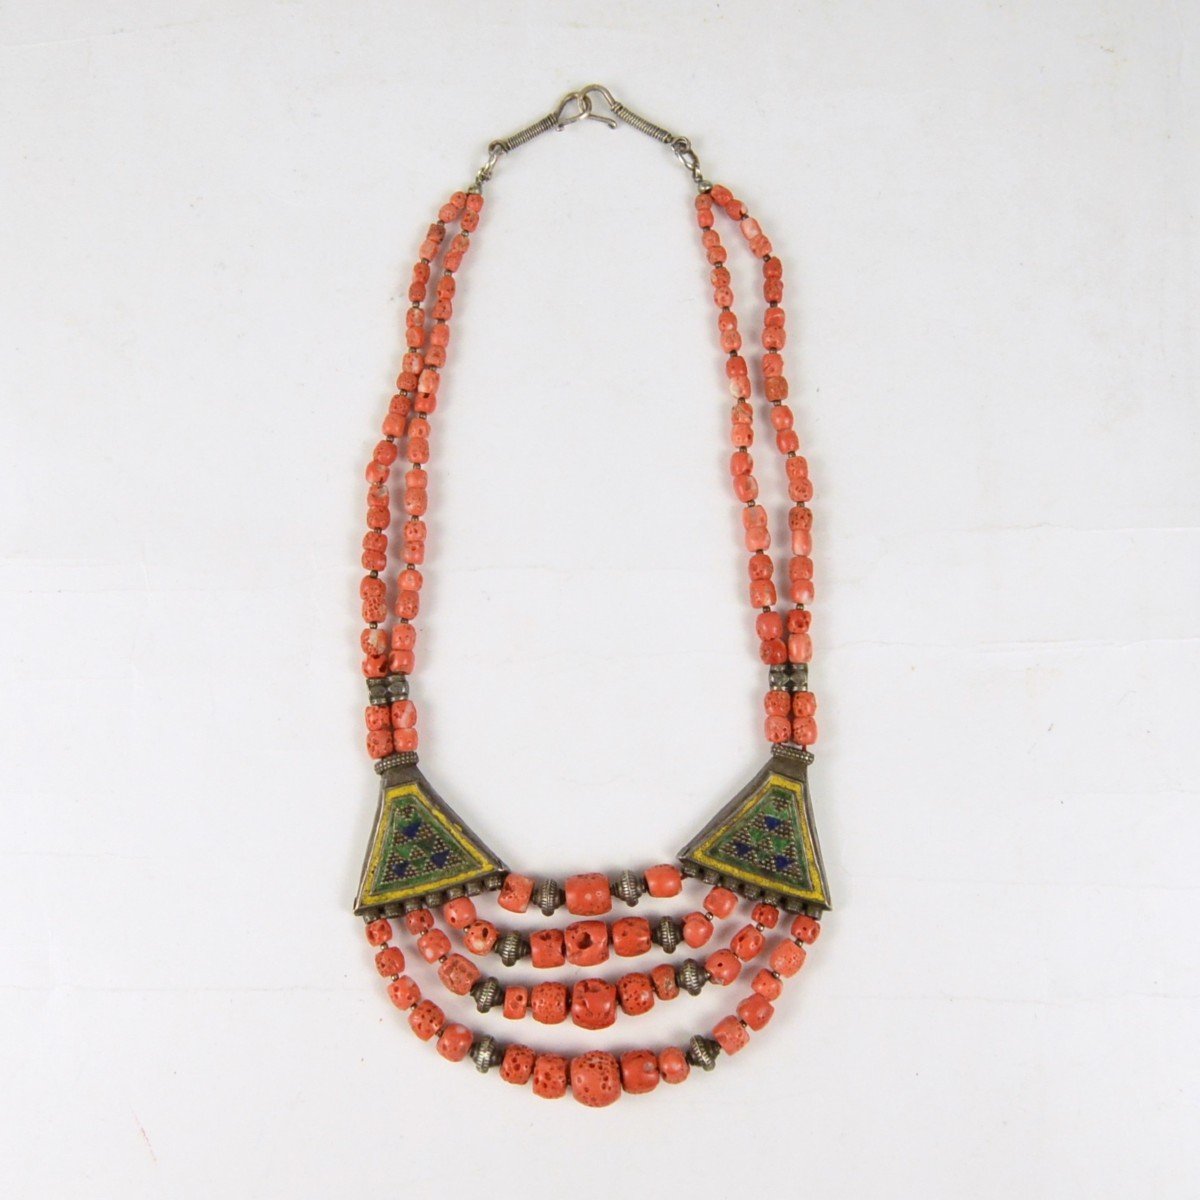 Enamelled Silver And Coral Berbère Necklace